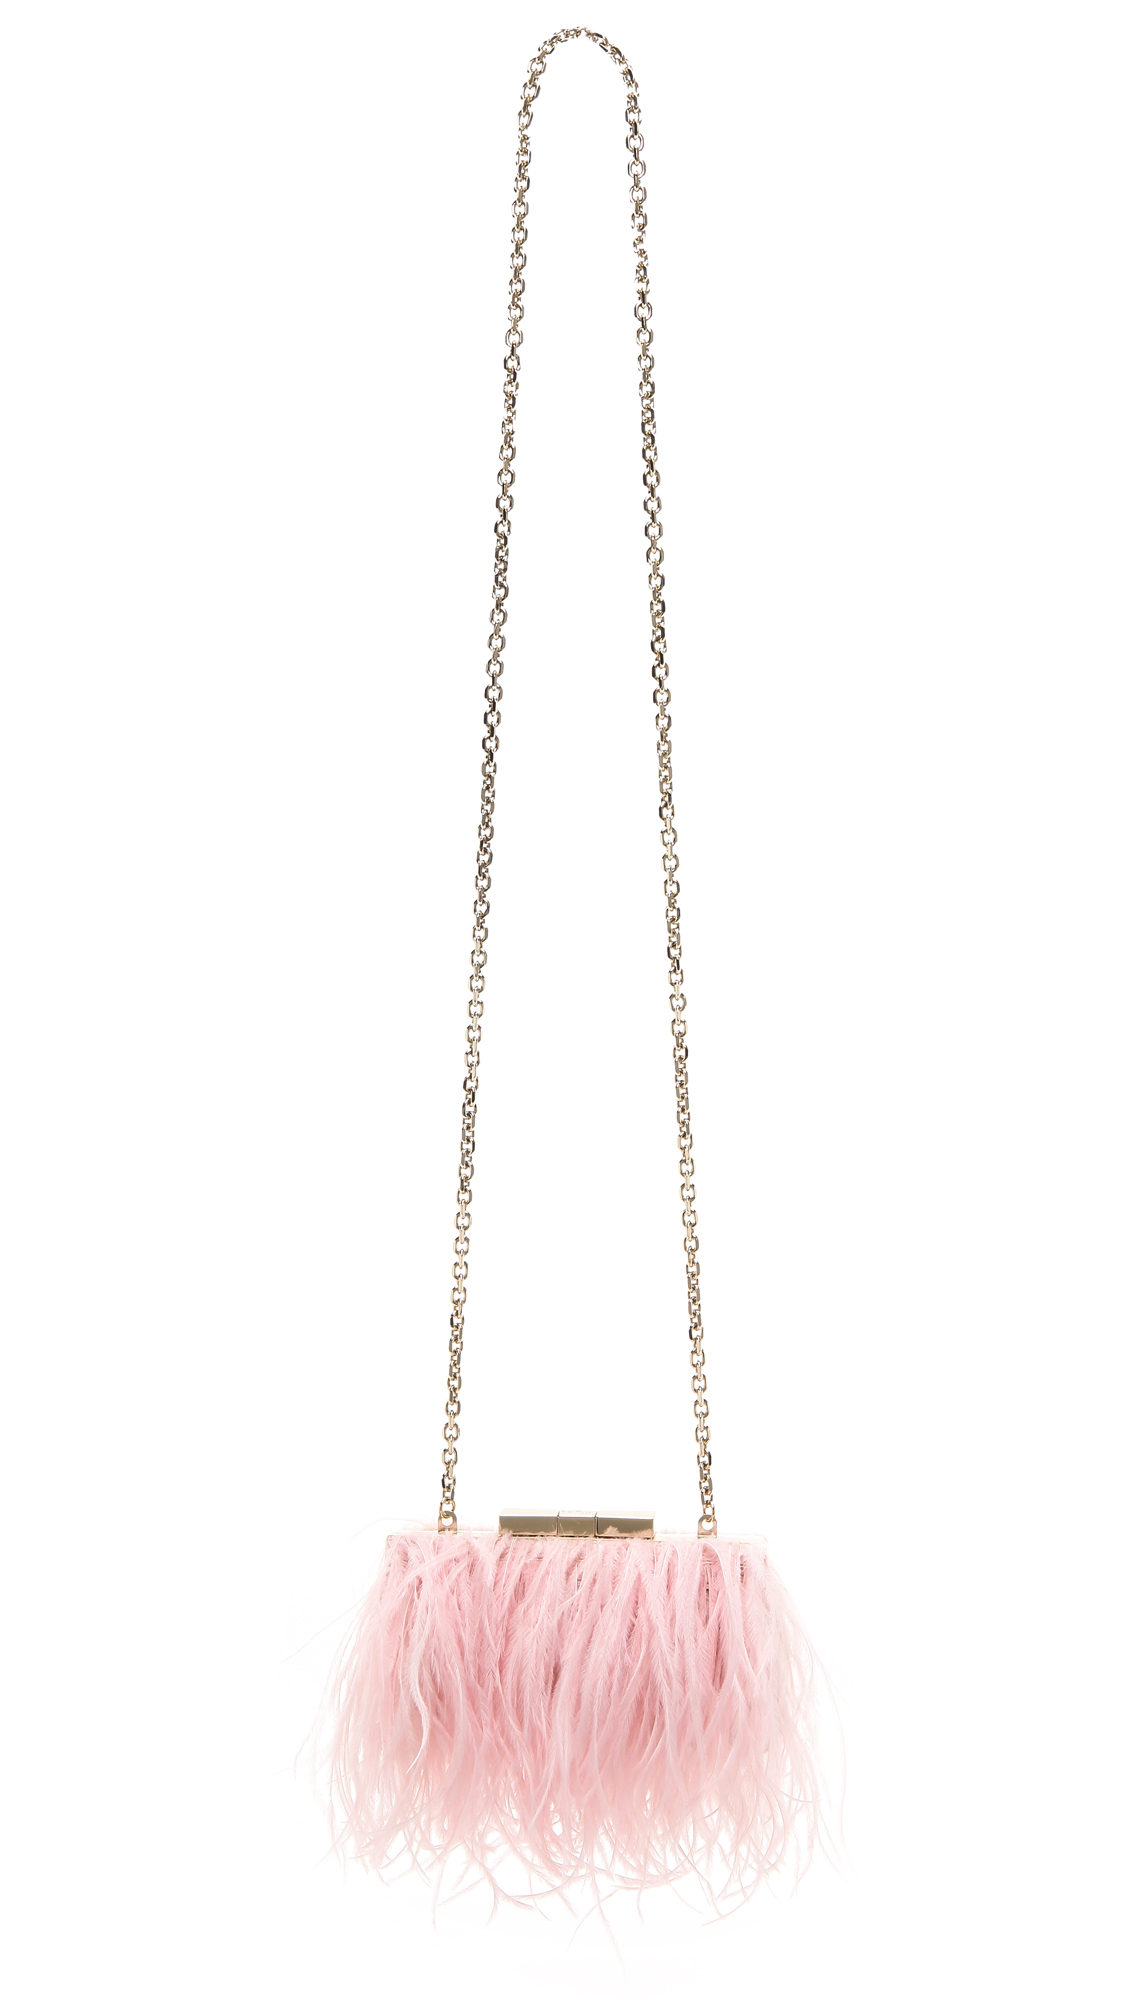 Lyst - Kate spade new york Evening Belles Feather Mini Bag - Rosy Dawn ...